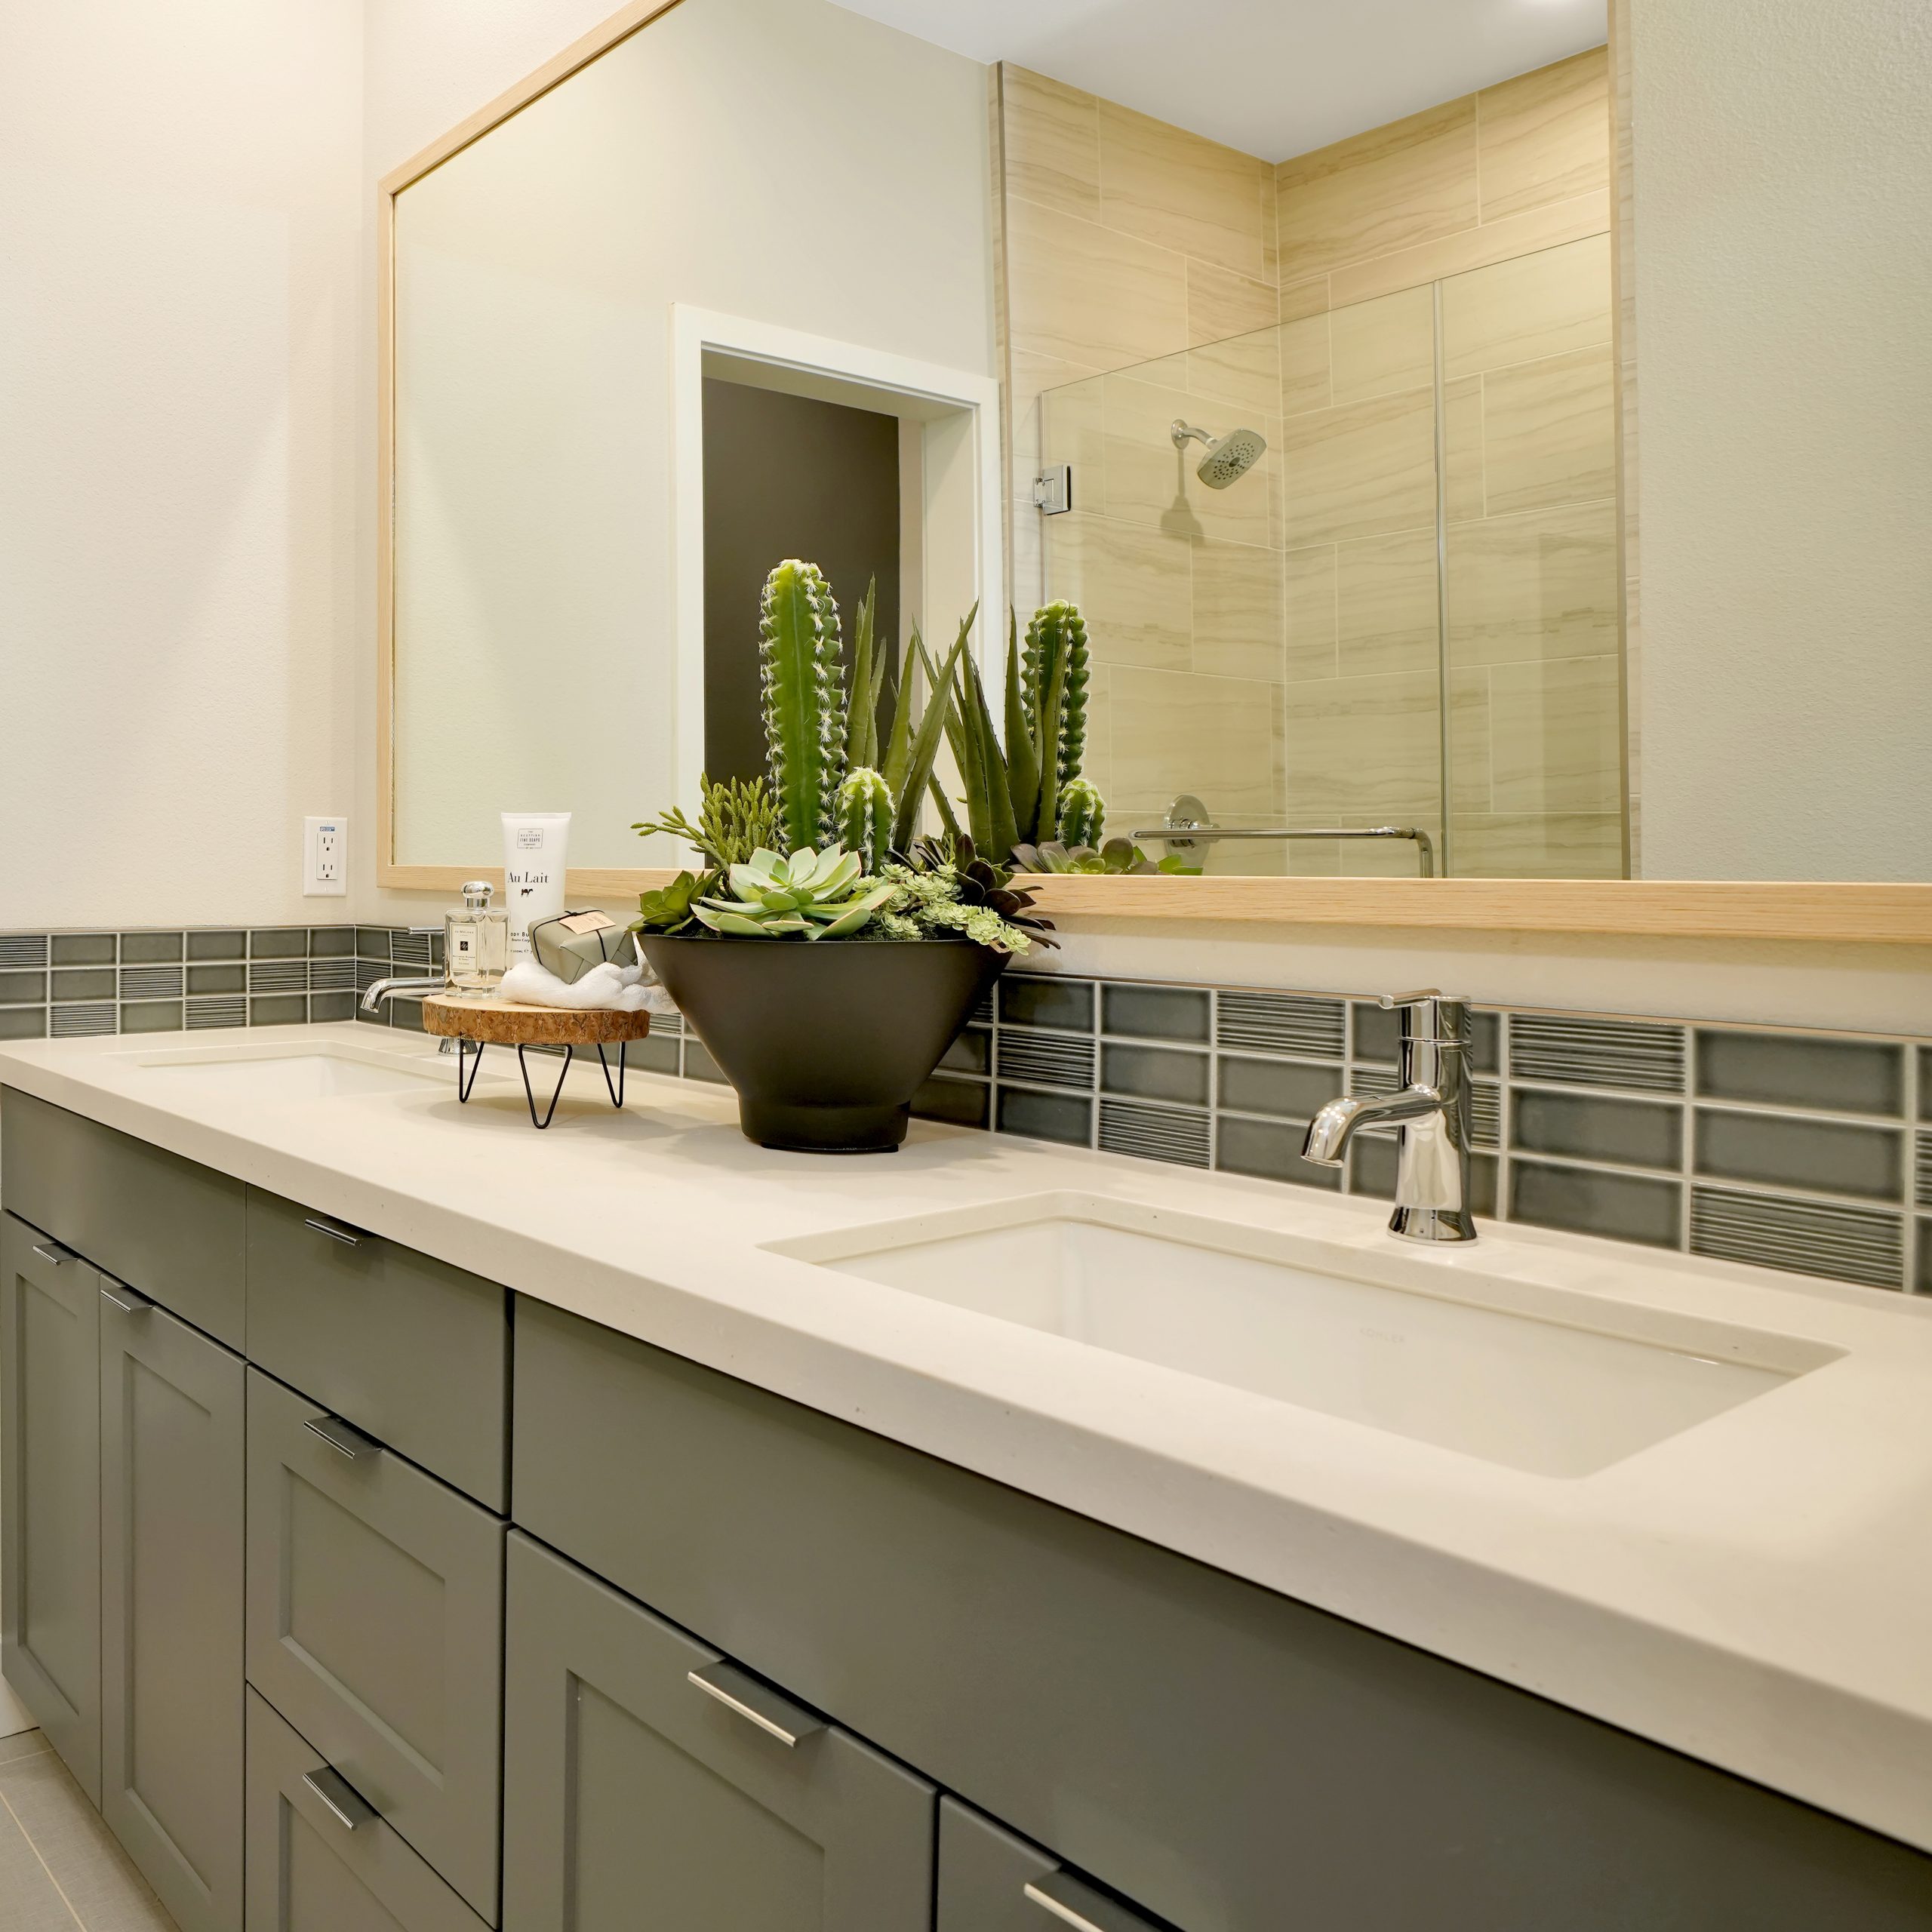 Bathroom at Townes at Magnolia by Melia Homes in Anaheim, CA